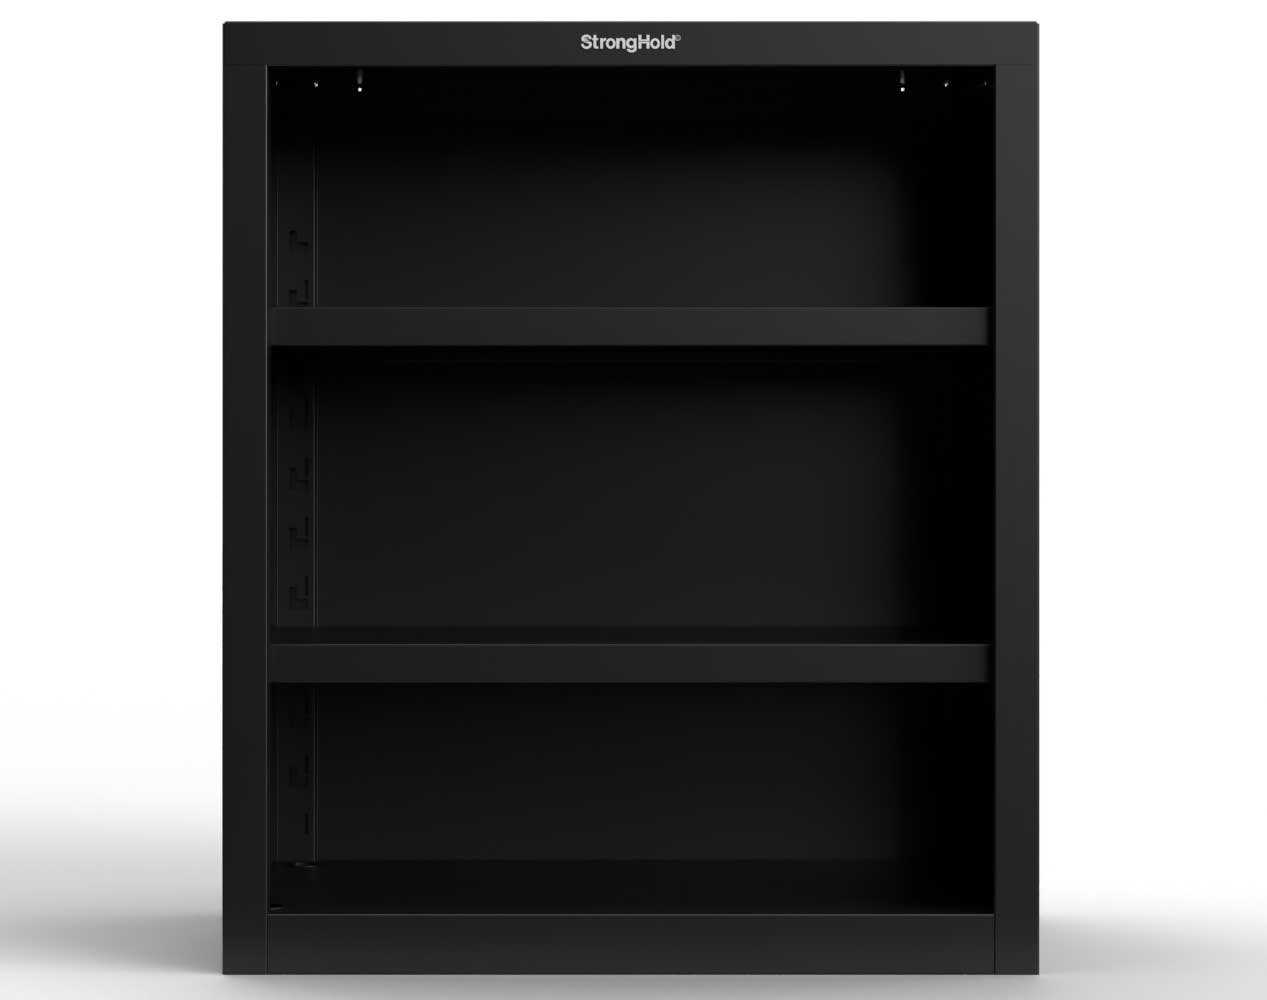 Heavy Duty 18 GA Counter-Height Closed Shelving Unit - 36 in. W x 24 in. D x 42 in. H